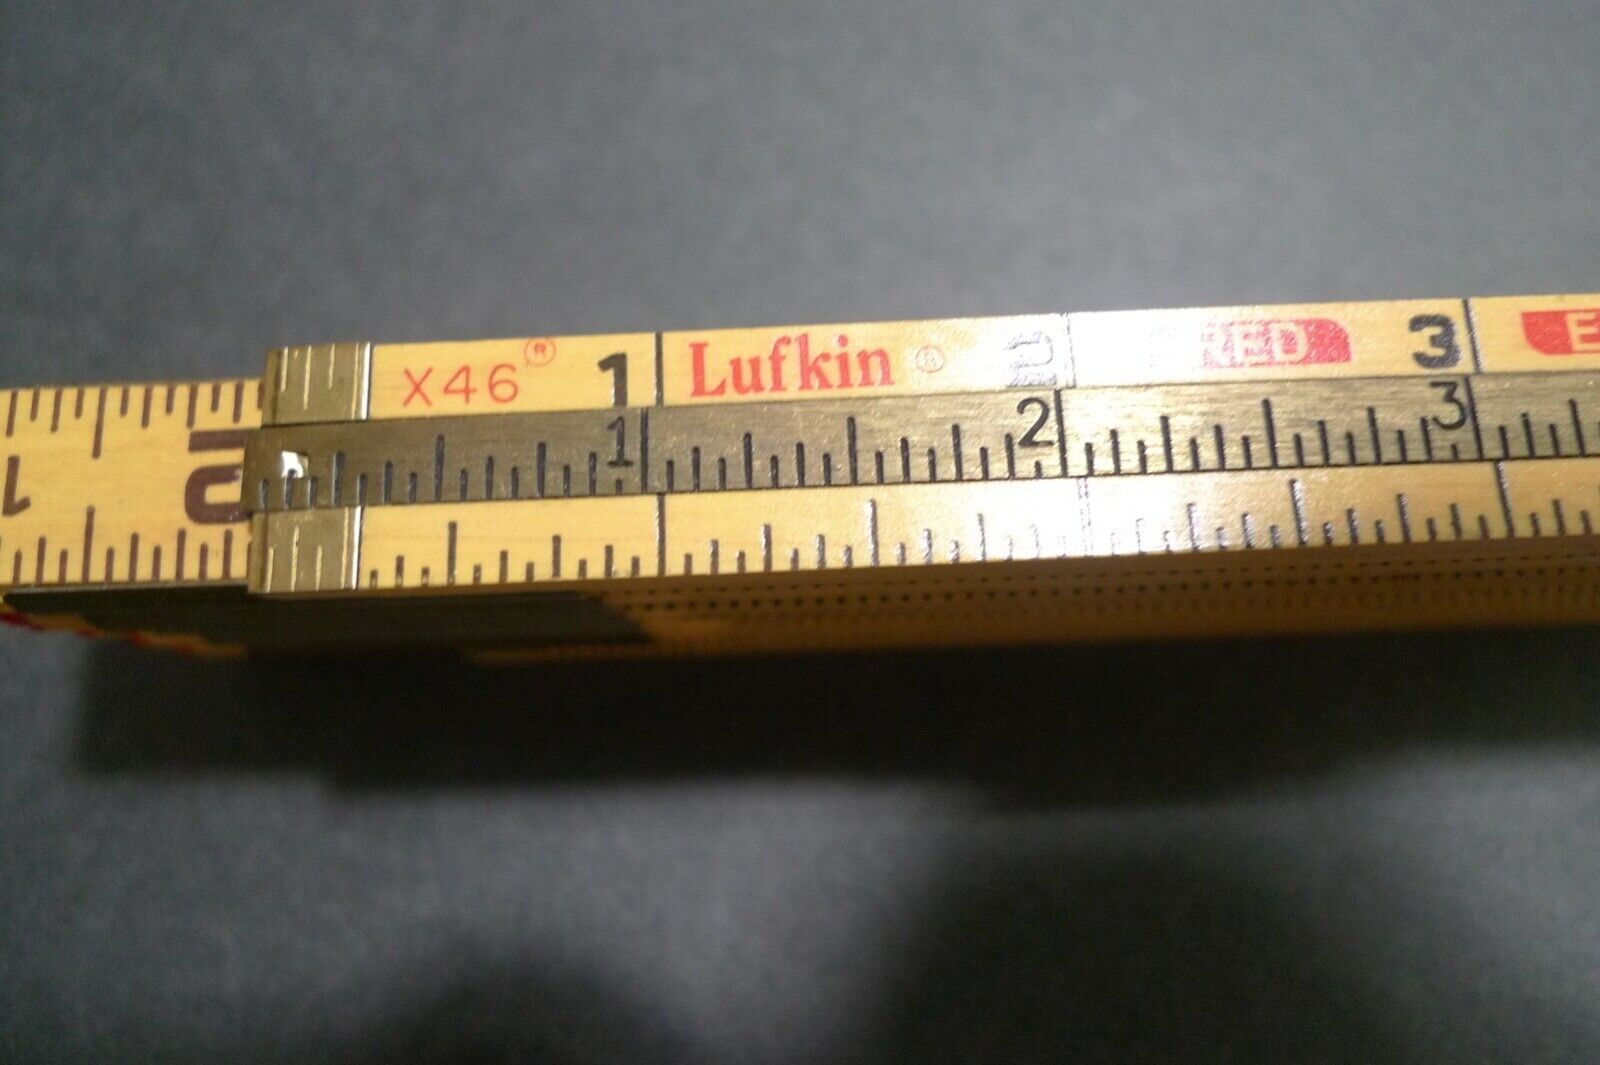 Vintage Lufkin Red End Folding Extension Rule No. X46 - New Old Stock-Made In US